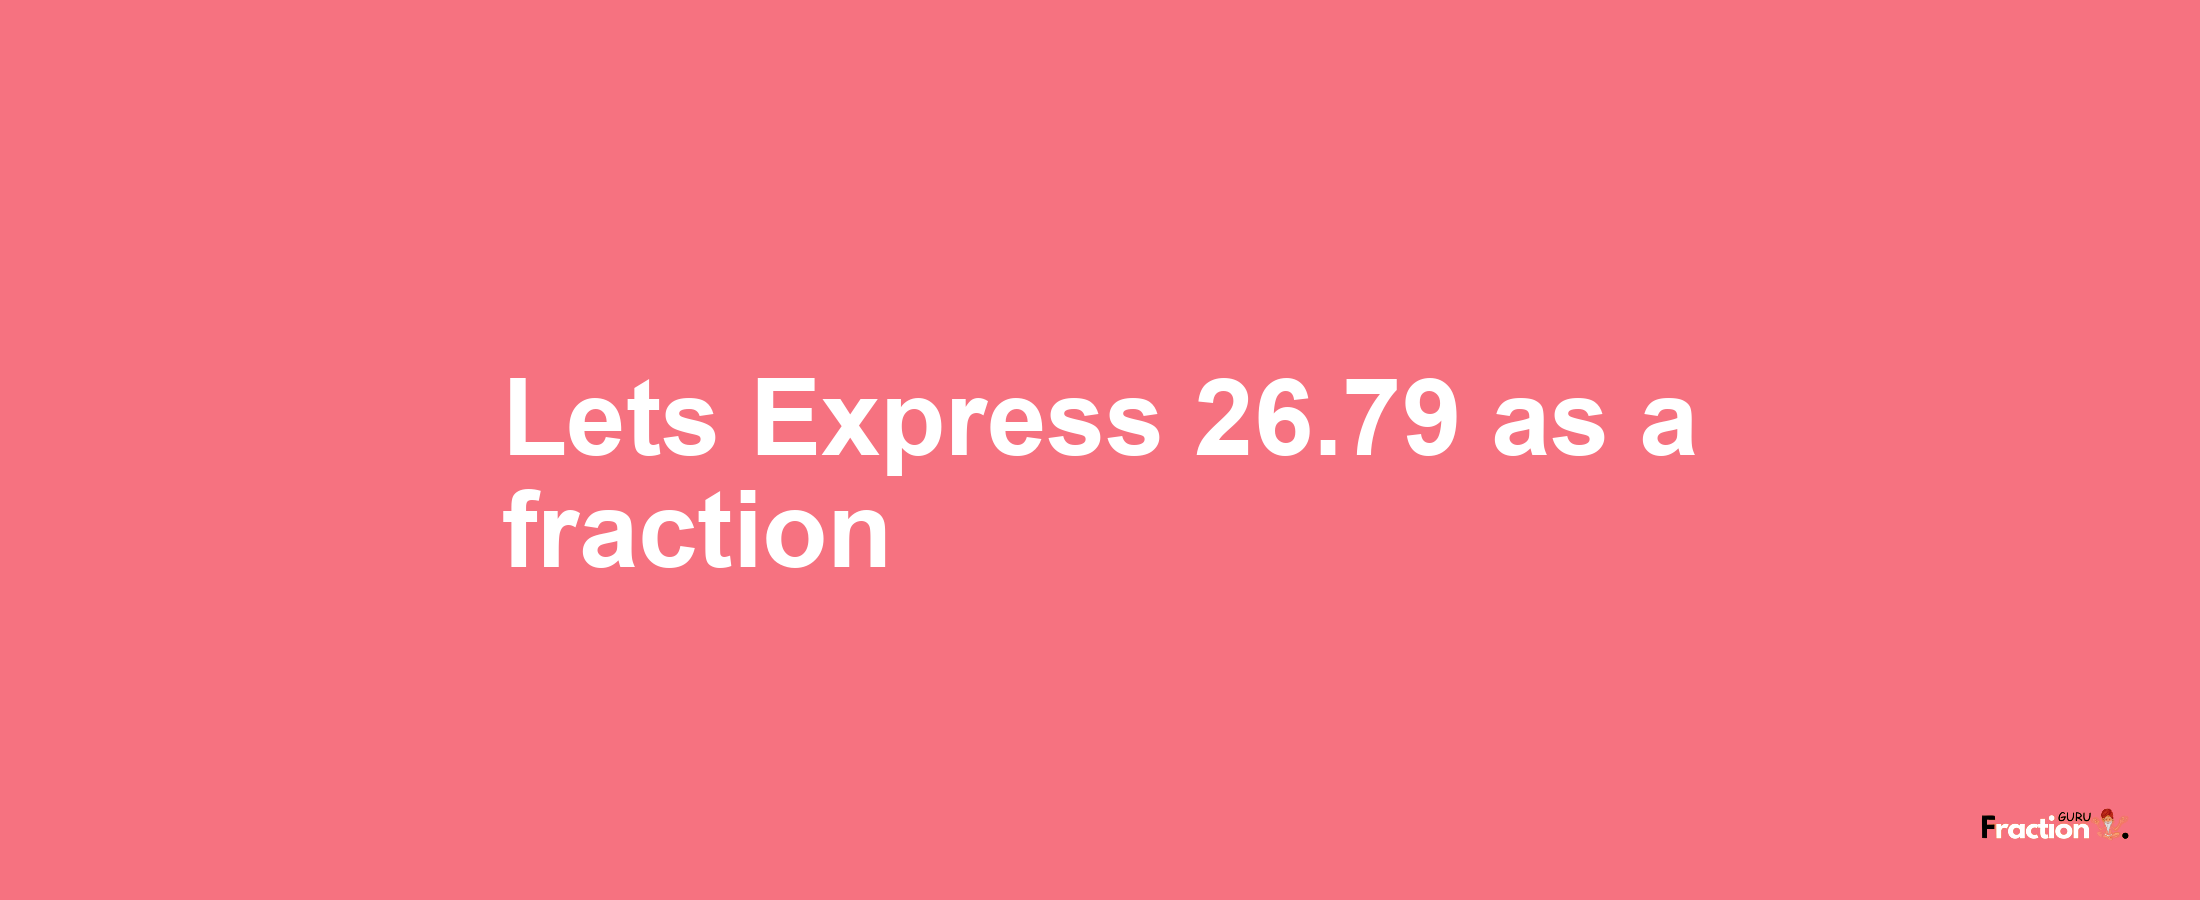 Lets Express 26.79 as afraction